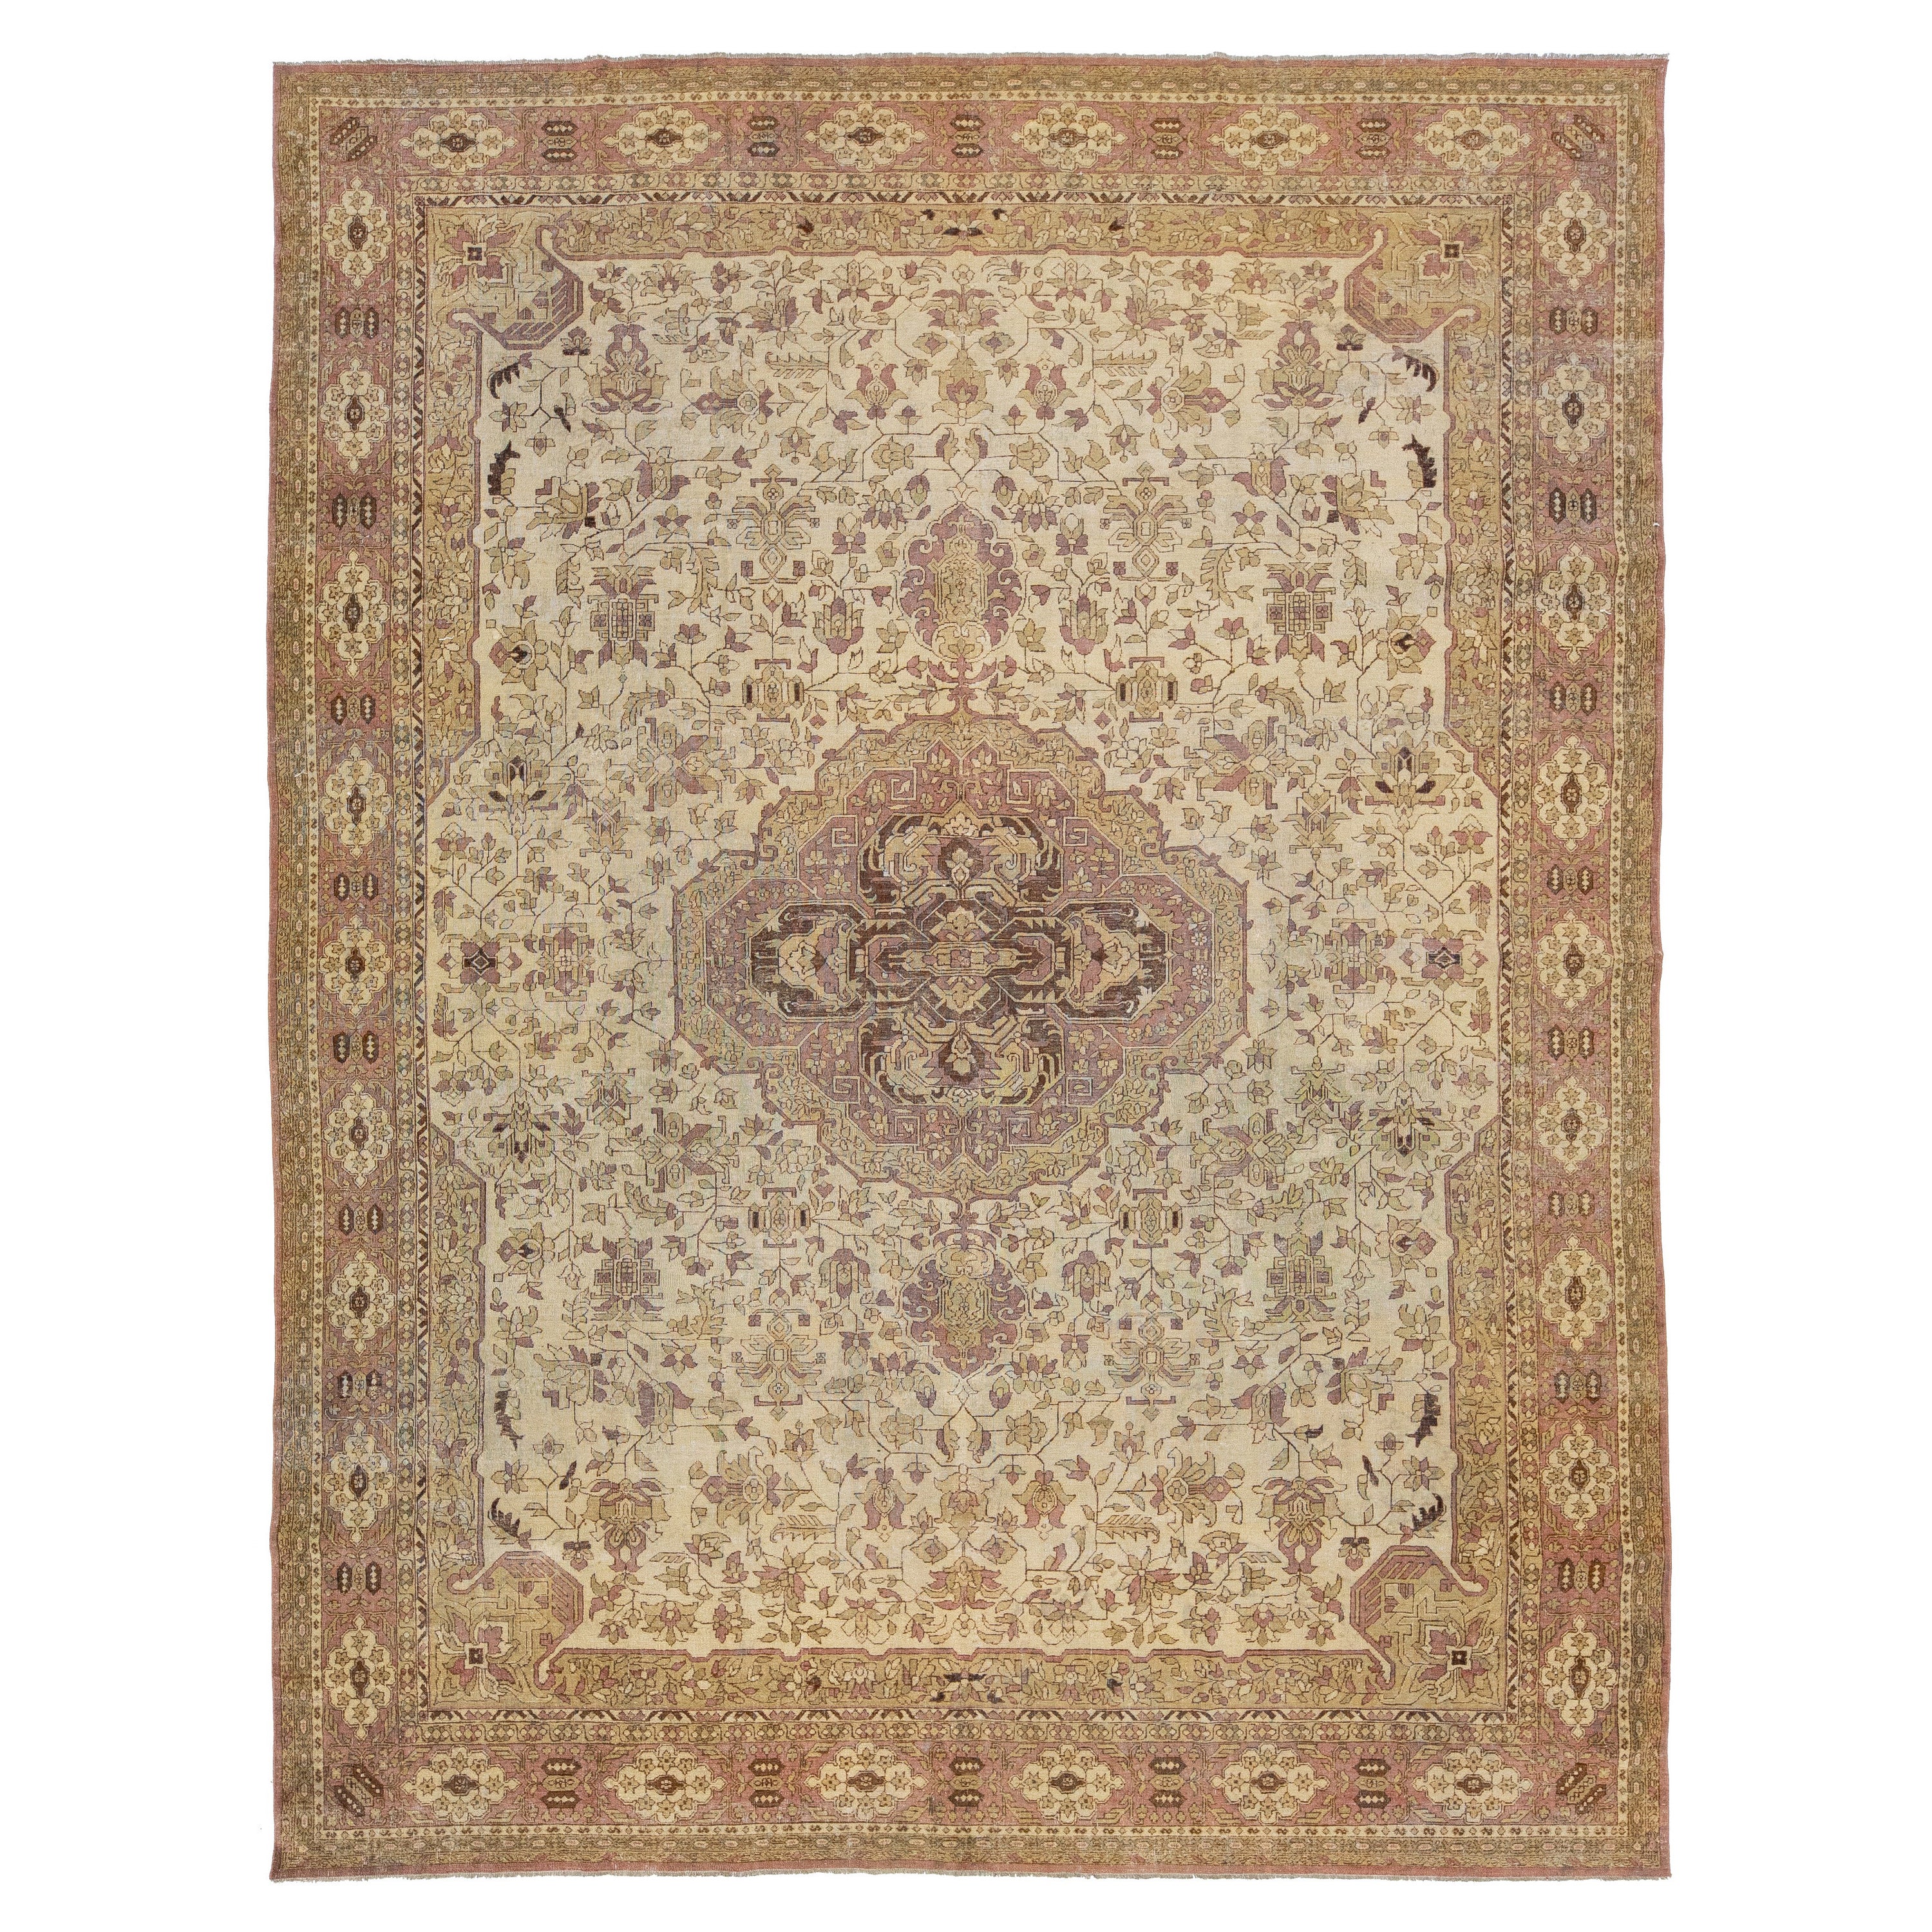 1910s Antique Indian Wool Agra Rug In Beige with Allover Design  For Sale